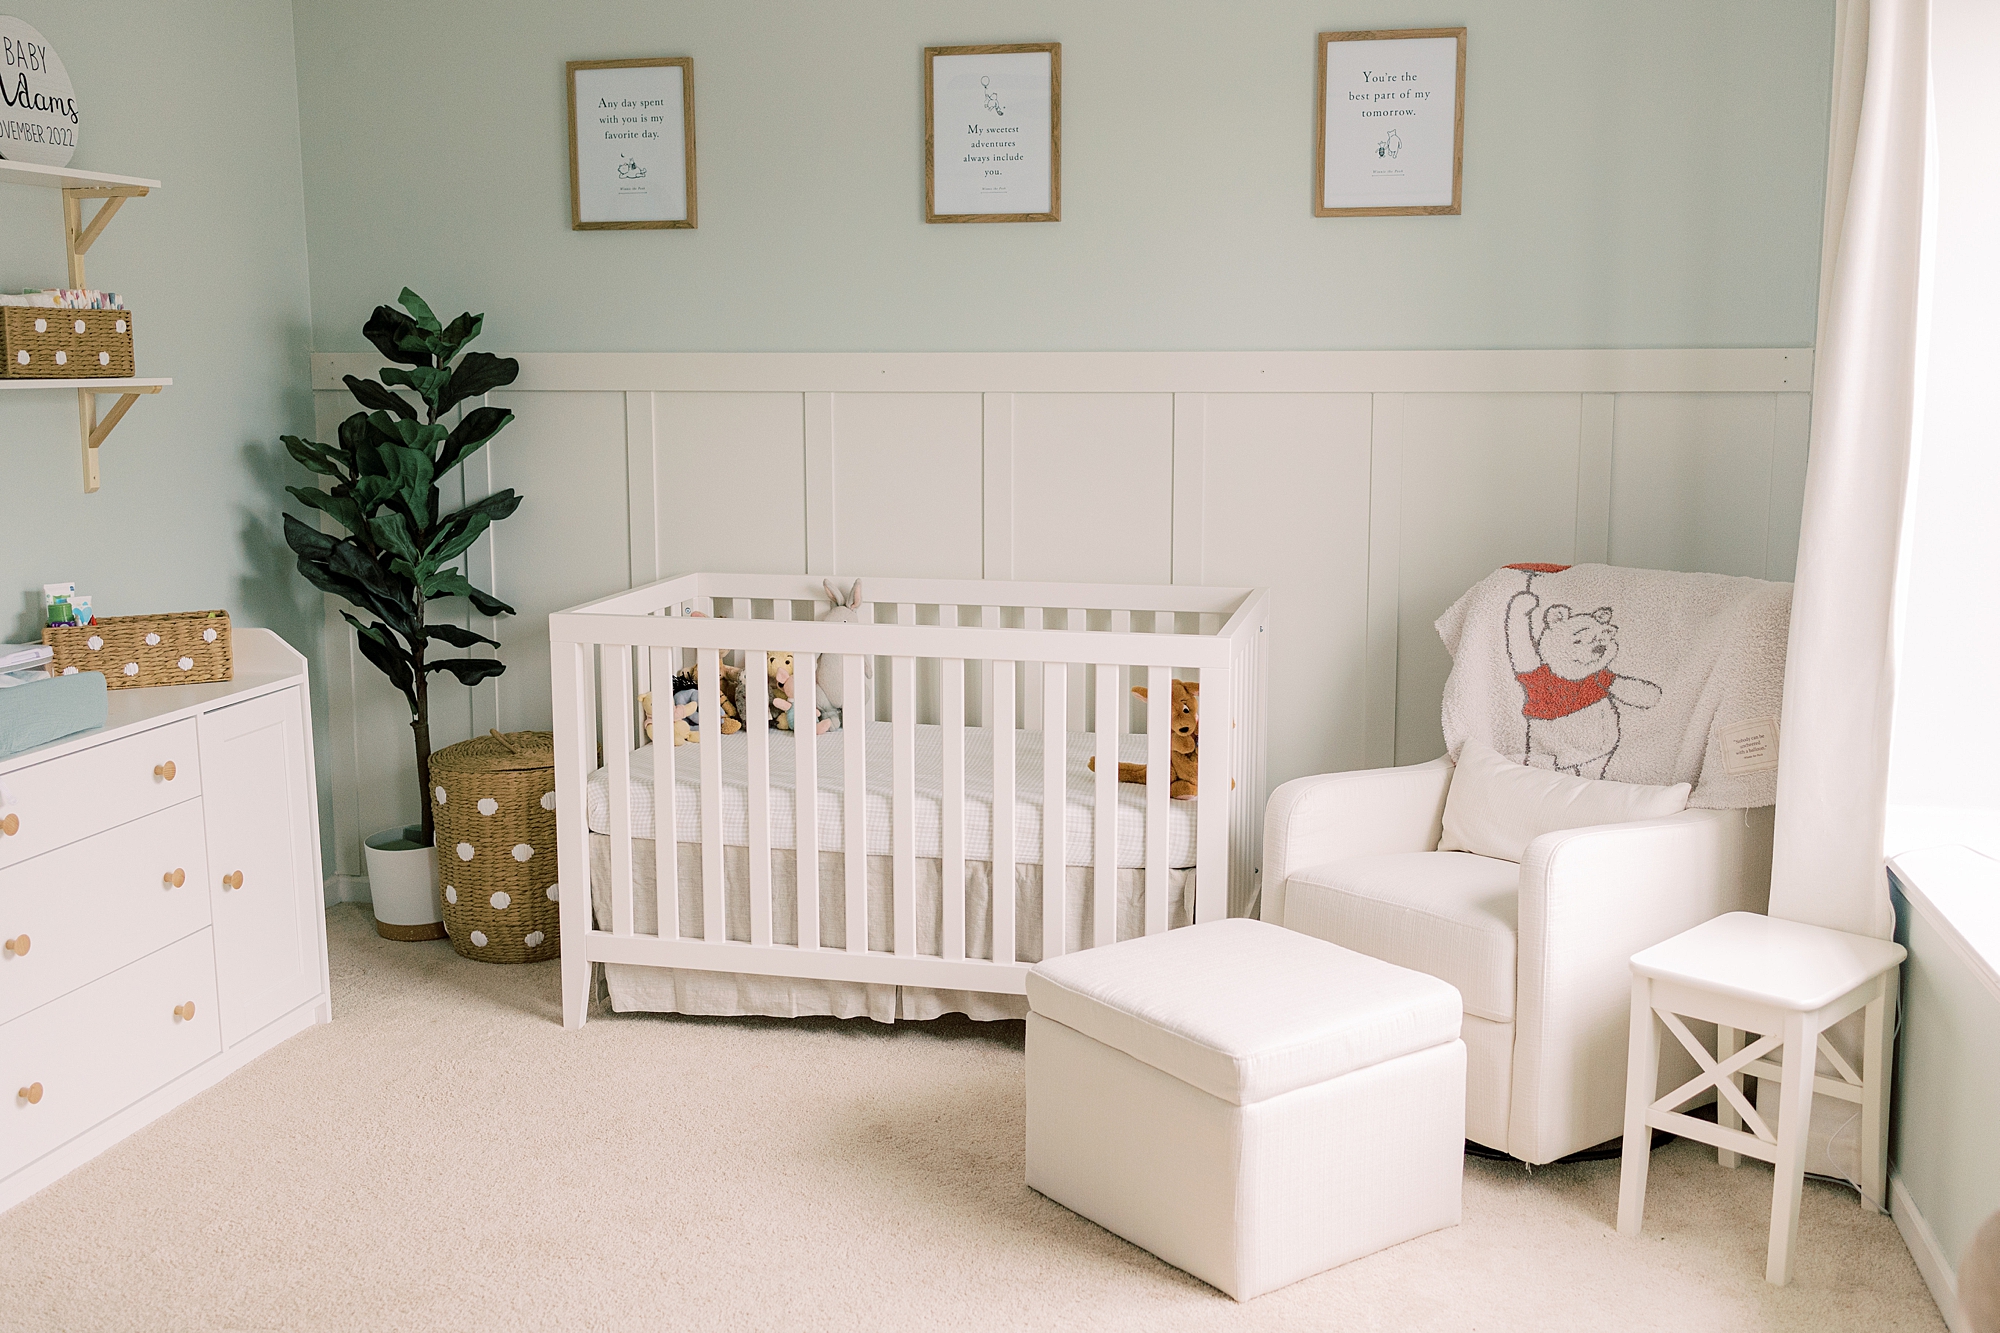 Winnie the Pooh nursery with green and white details 